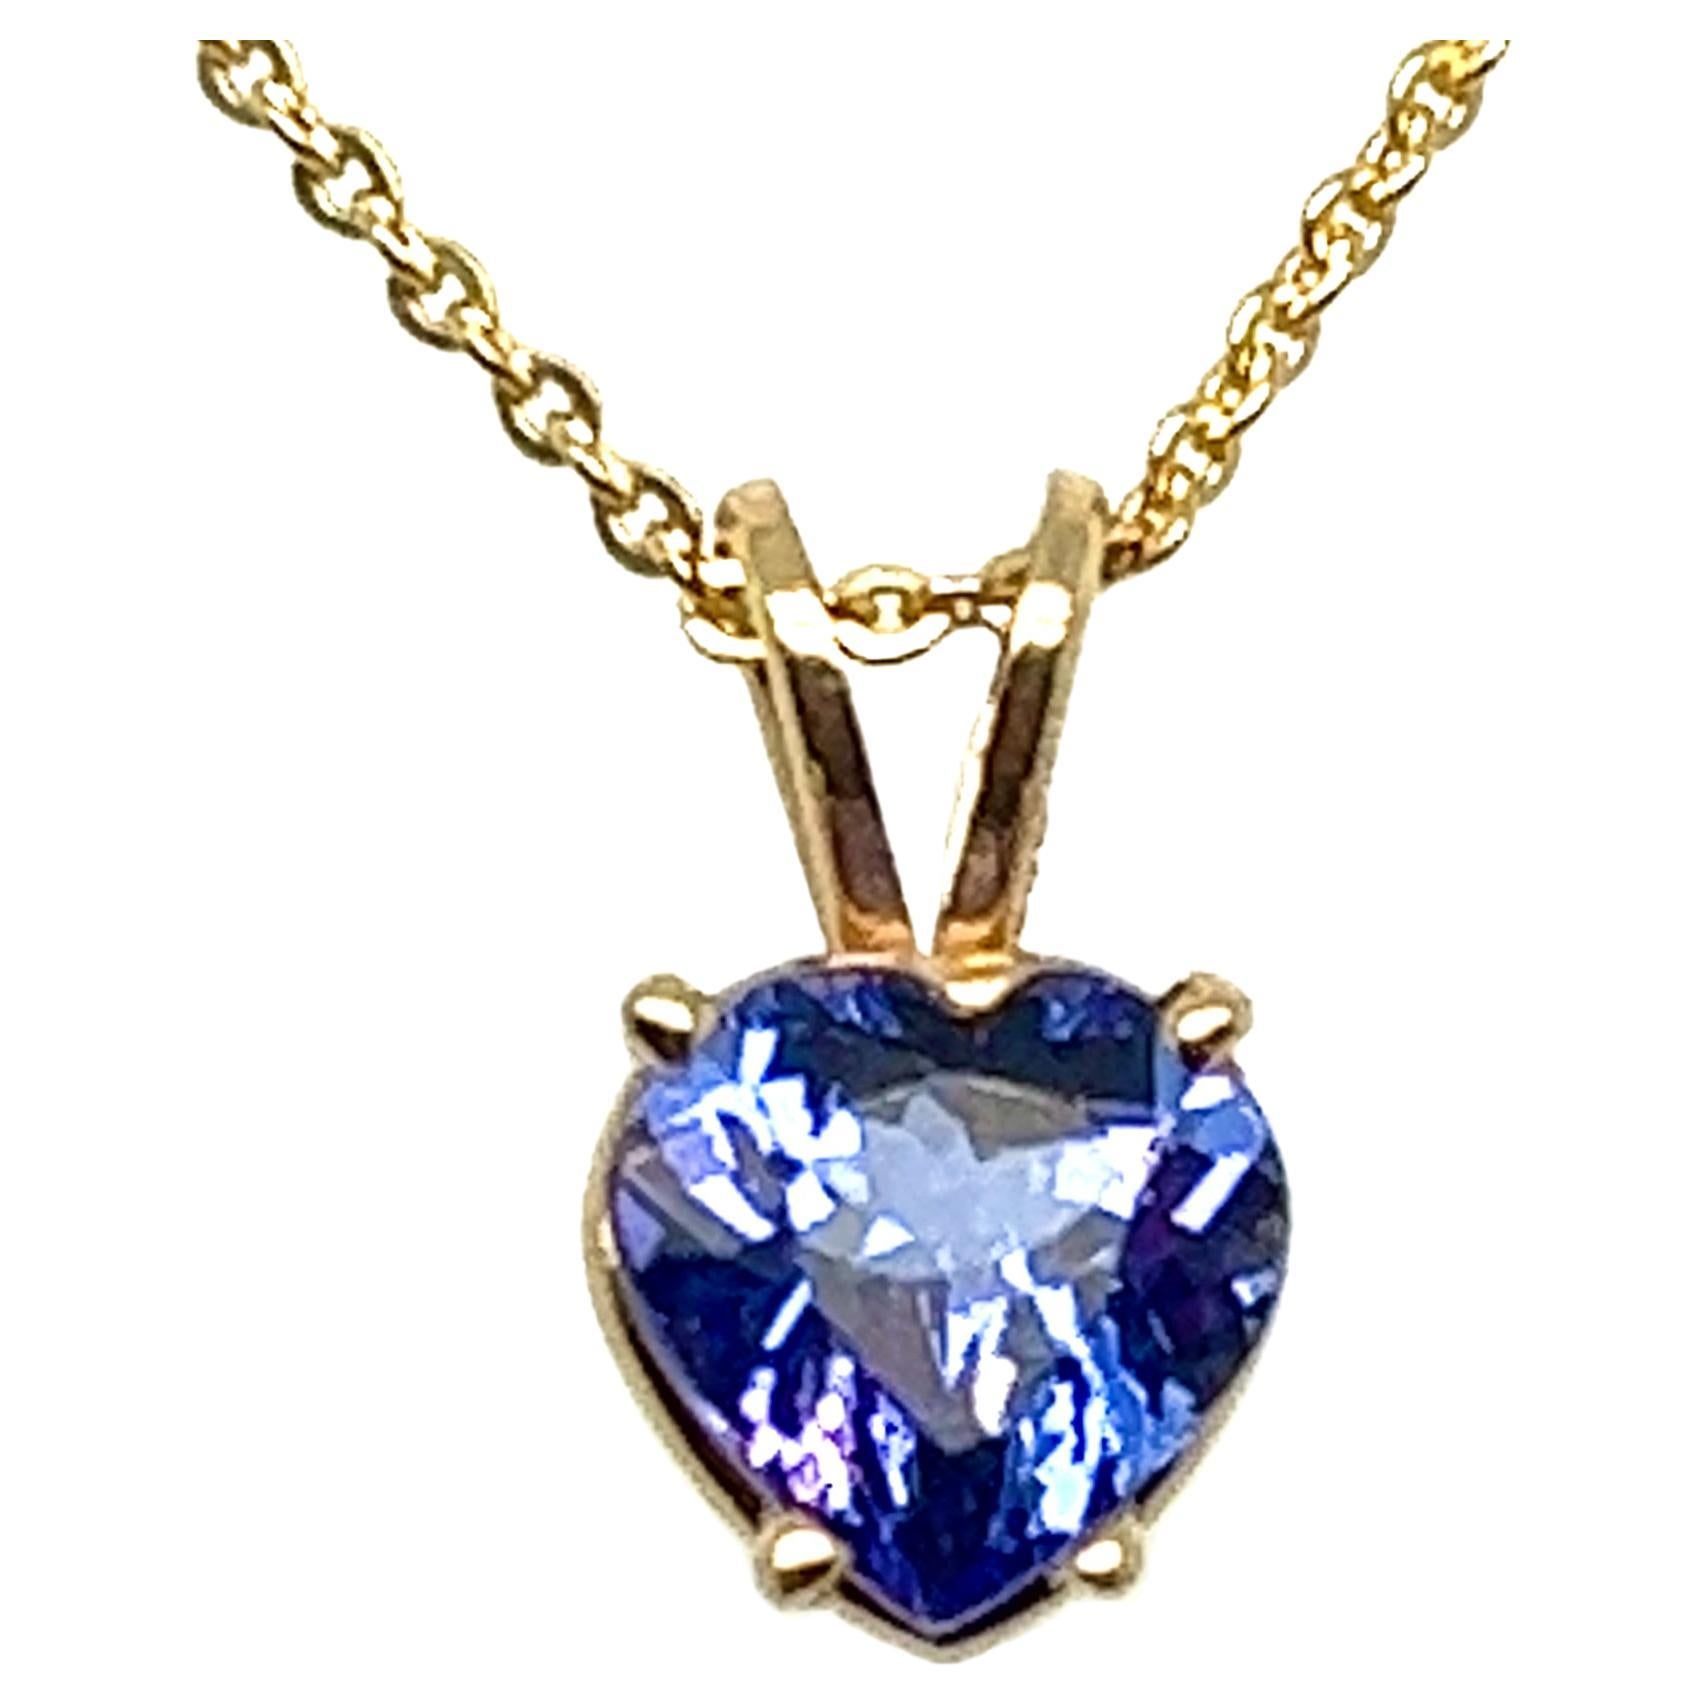 Offered here is a heart-shaped natural earth mined Tanzanite weighing 1.65 carats, 7.50mm by 7.40mm.
Vivid violet purple color, near flawless and mounted in a simple yet elegant 4 prong solitaire basket with rabbit ears bale, hanging on a solid 20